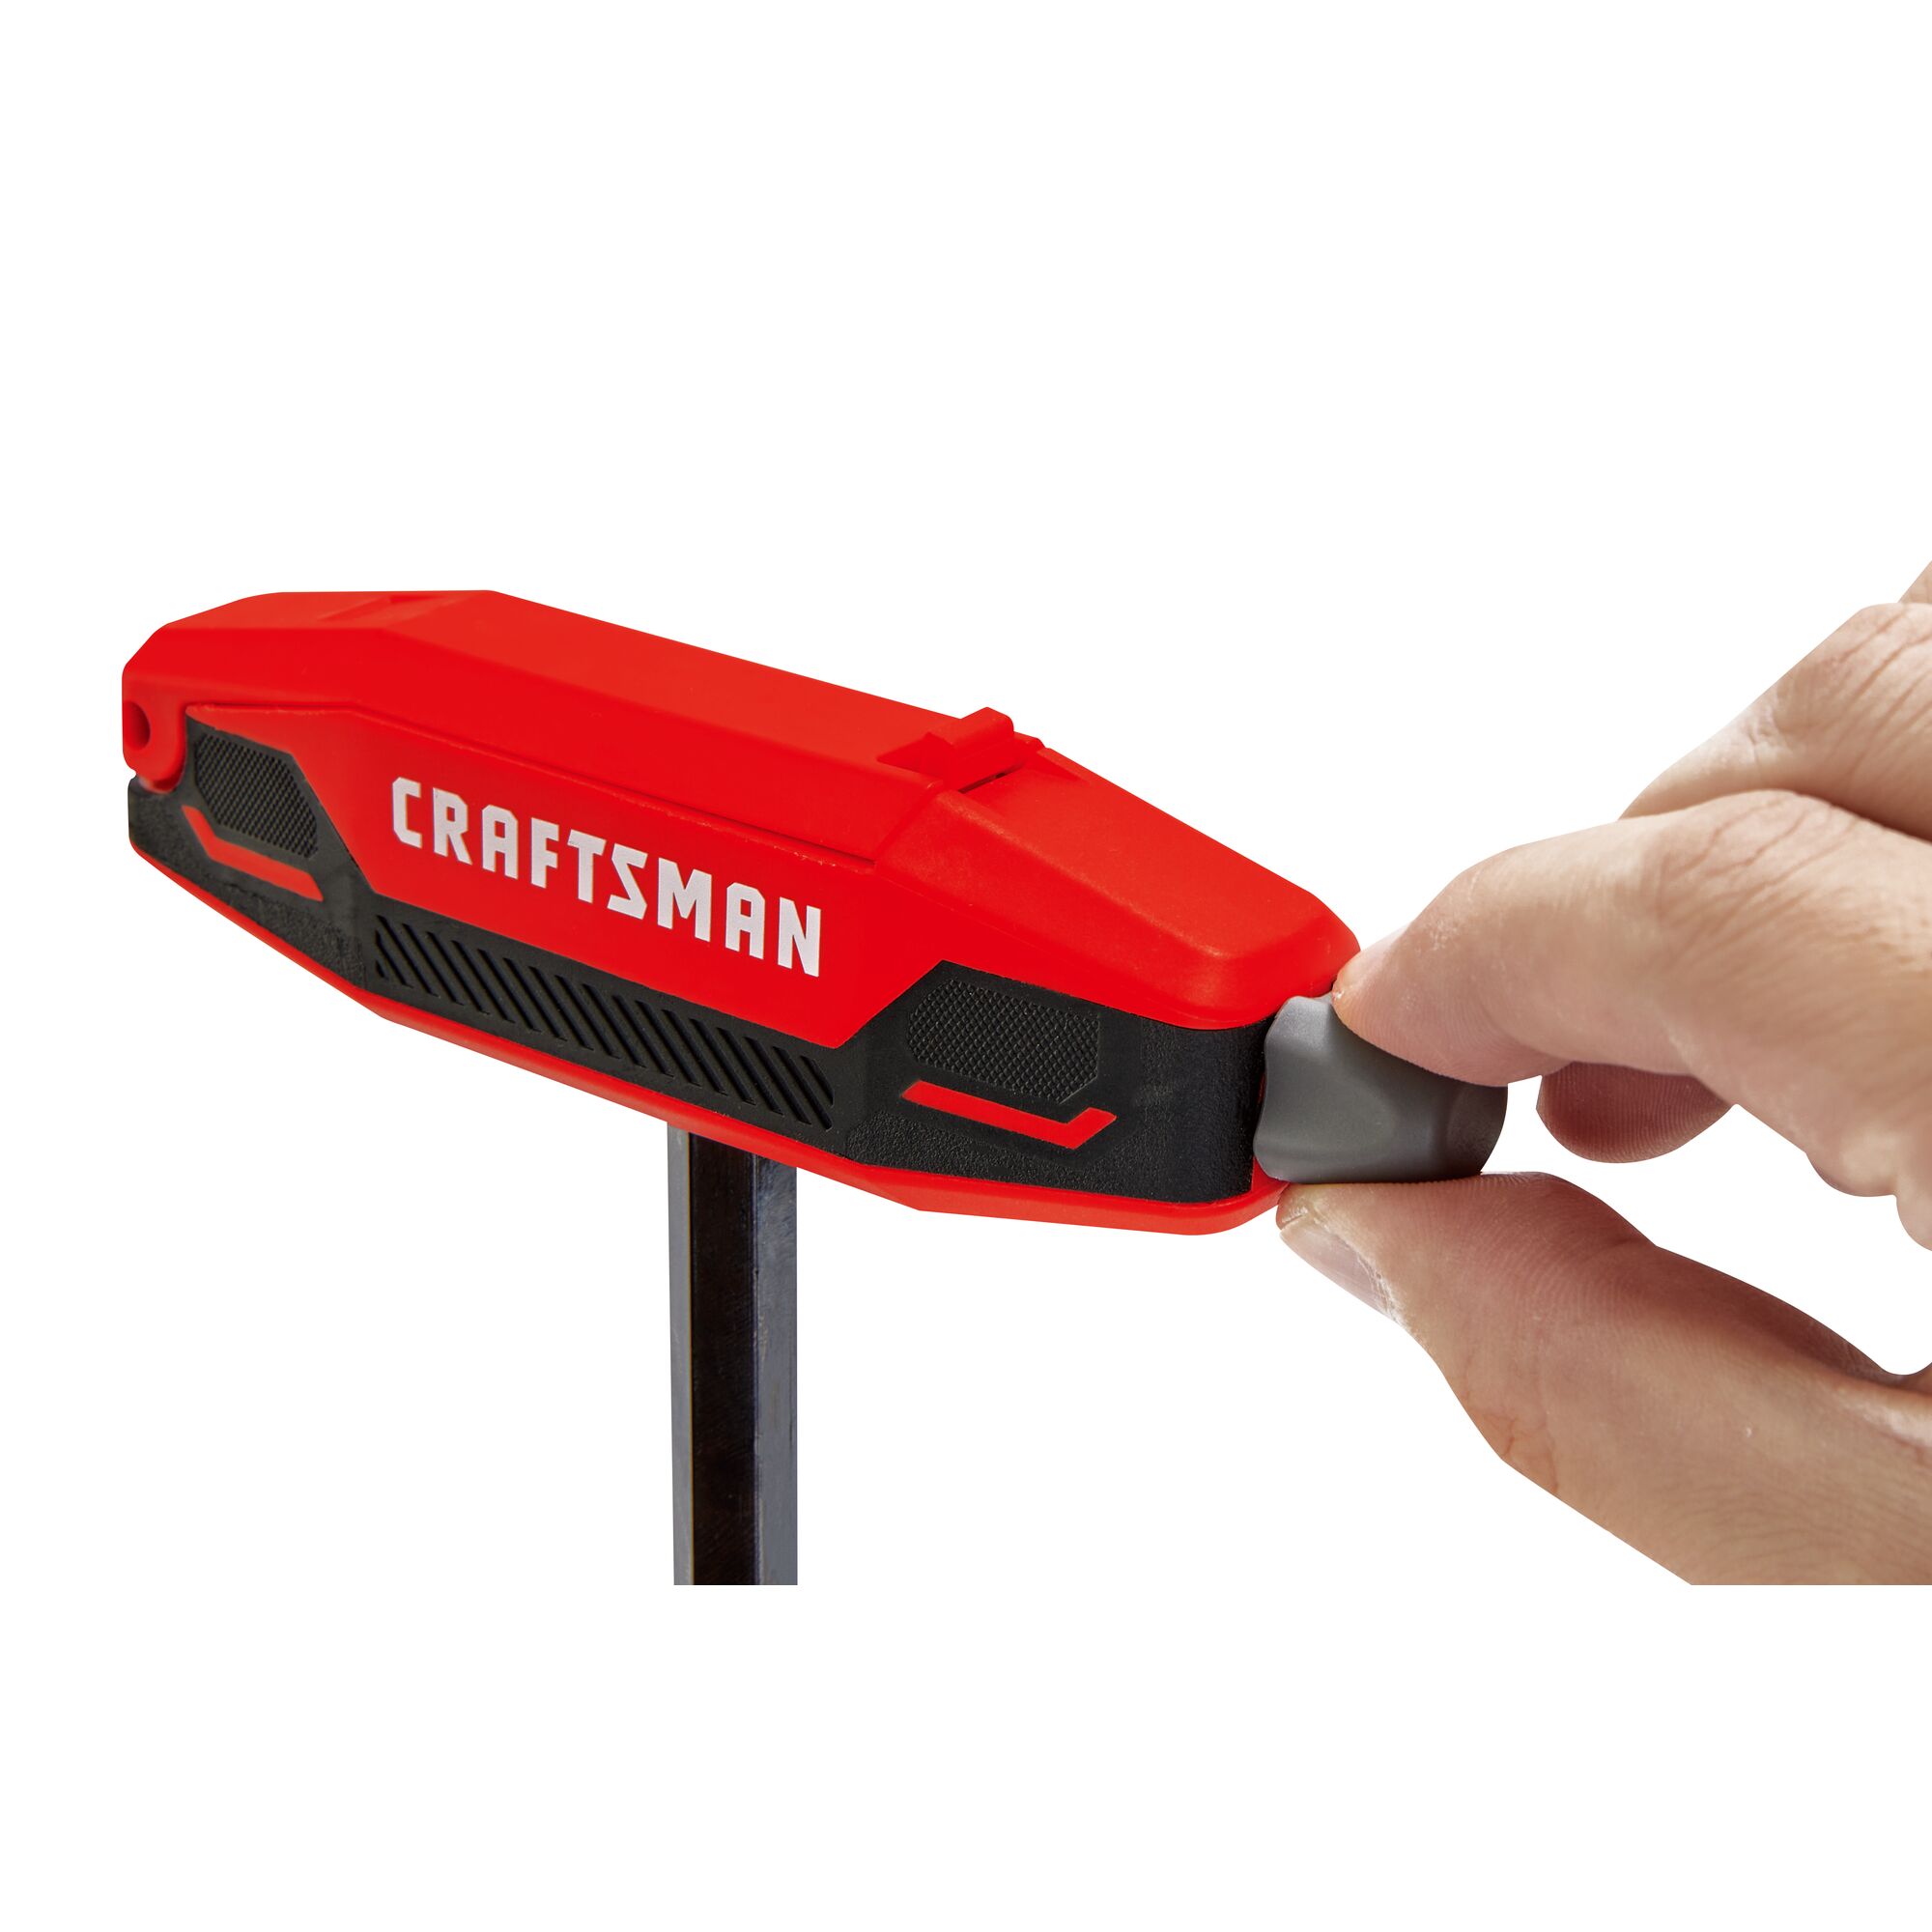 Craftsman Universal L-to-T adapter